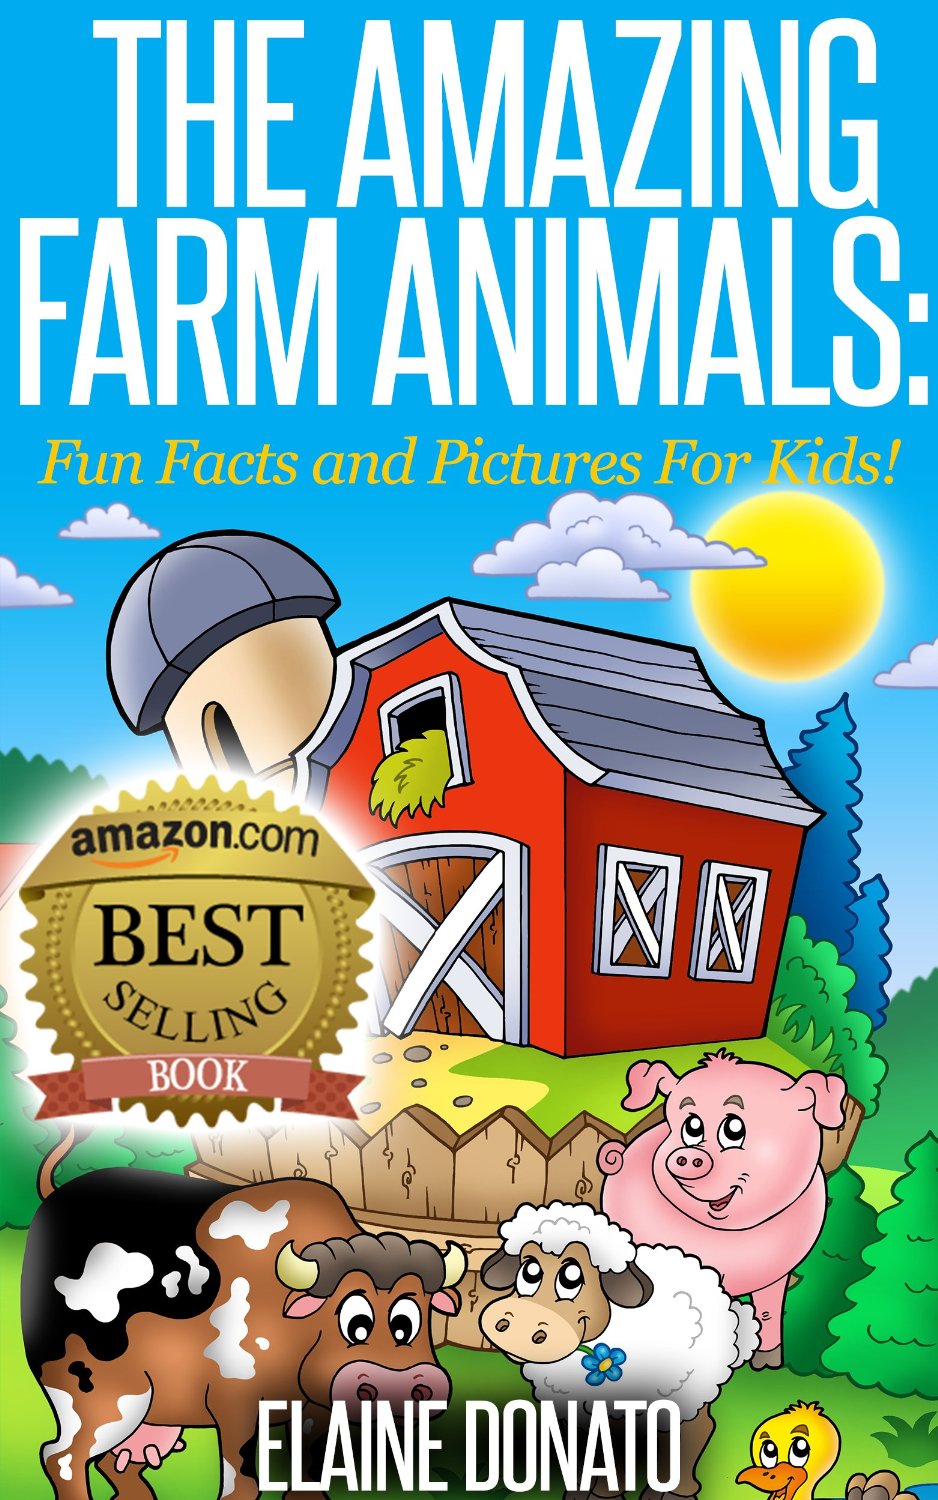 The Amazing Farm Animals: Fun Facts and Pictures for Kids! by Elaine Donato